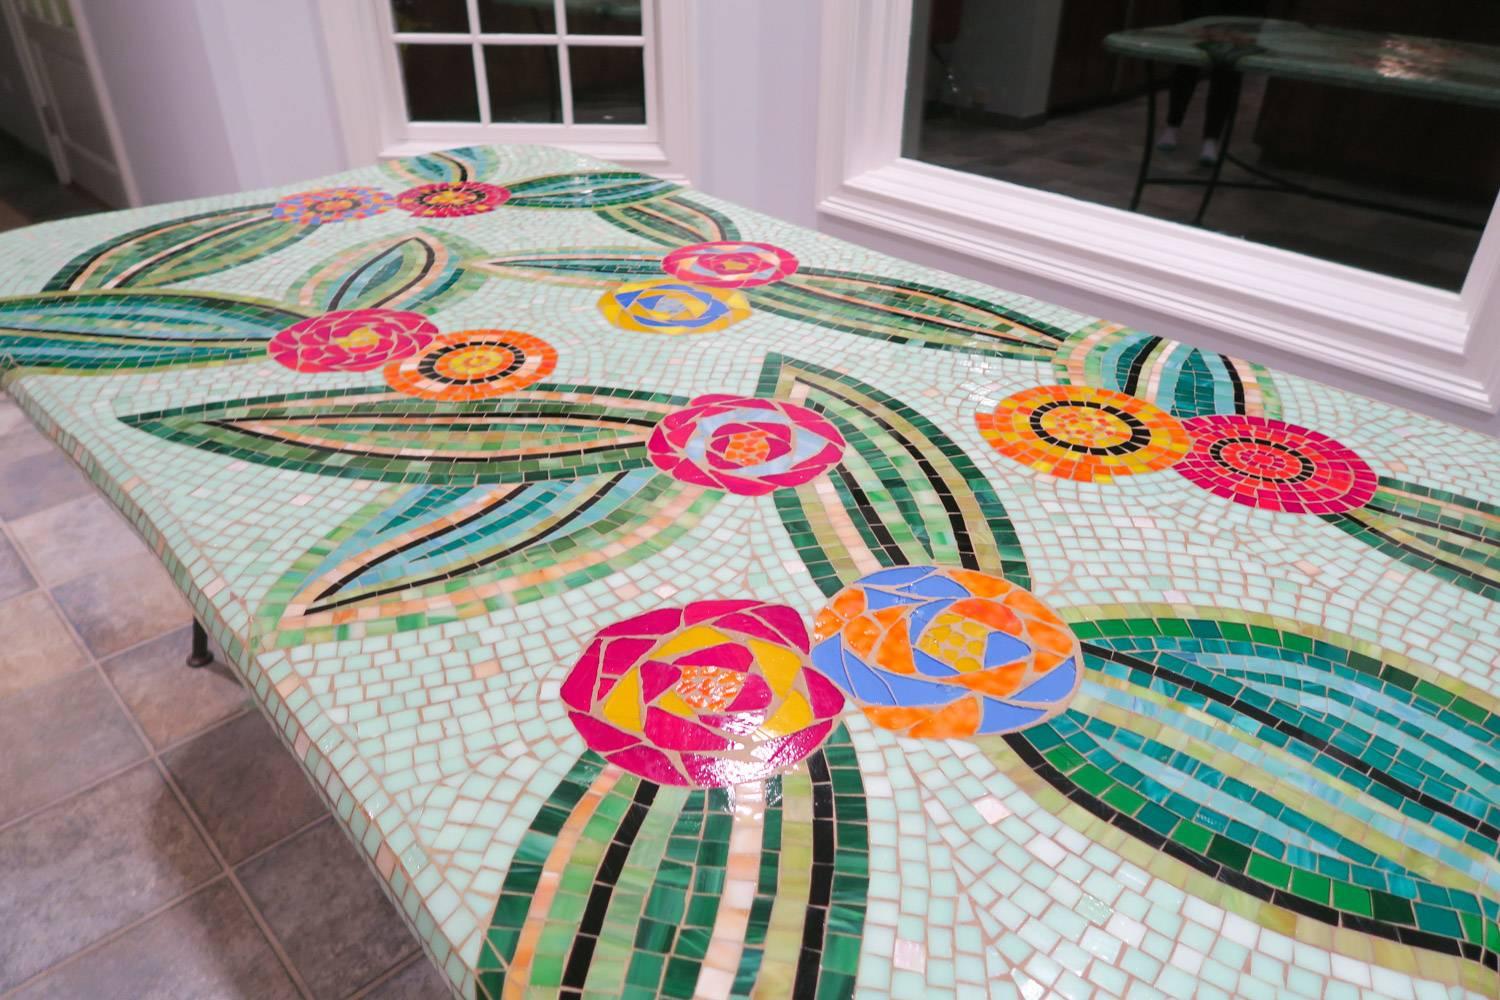 Colorfully beautiful mosaic dining table custom-made! A beautiful Array of blues, reds, oranges, sea glass greens, taupe and sky - This is a one of a kind custom piece. Wrought iron base. Spectacular. Seats 8 - 10.